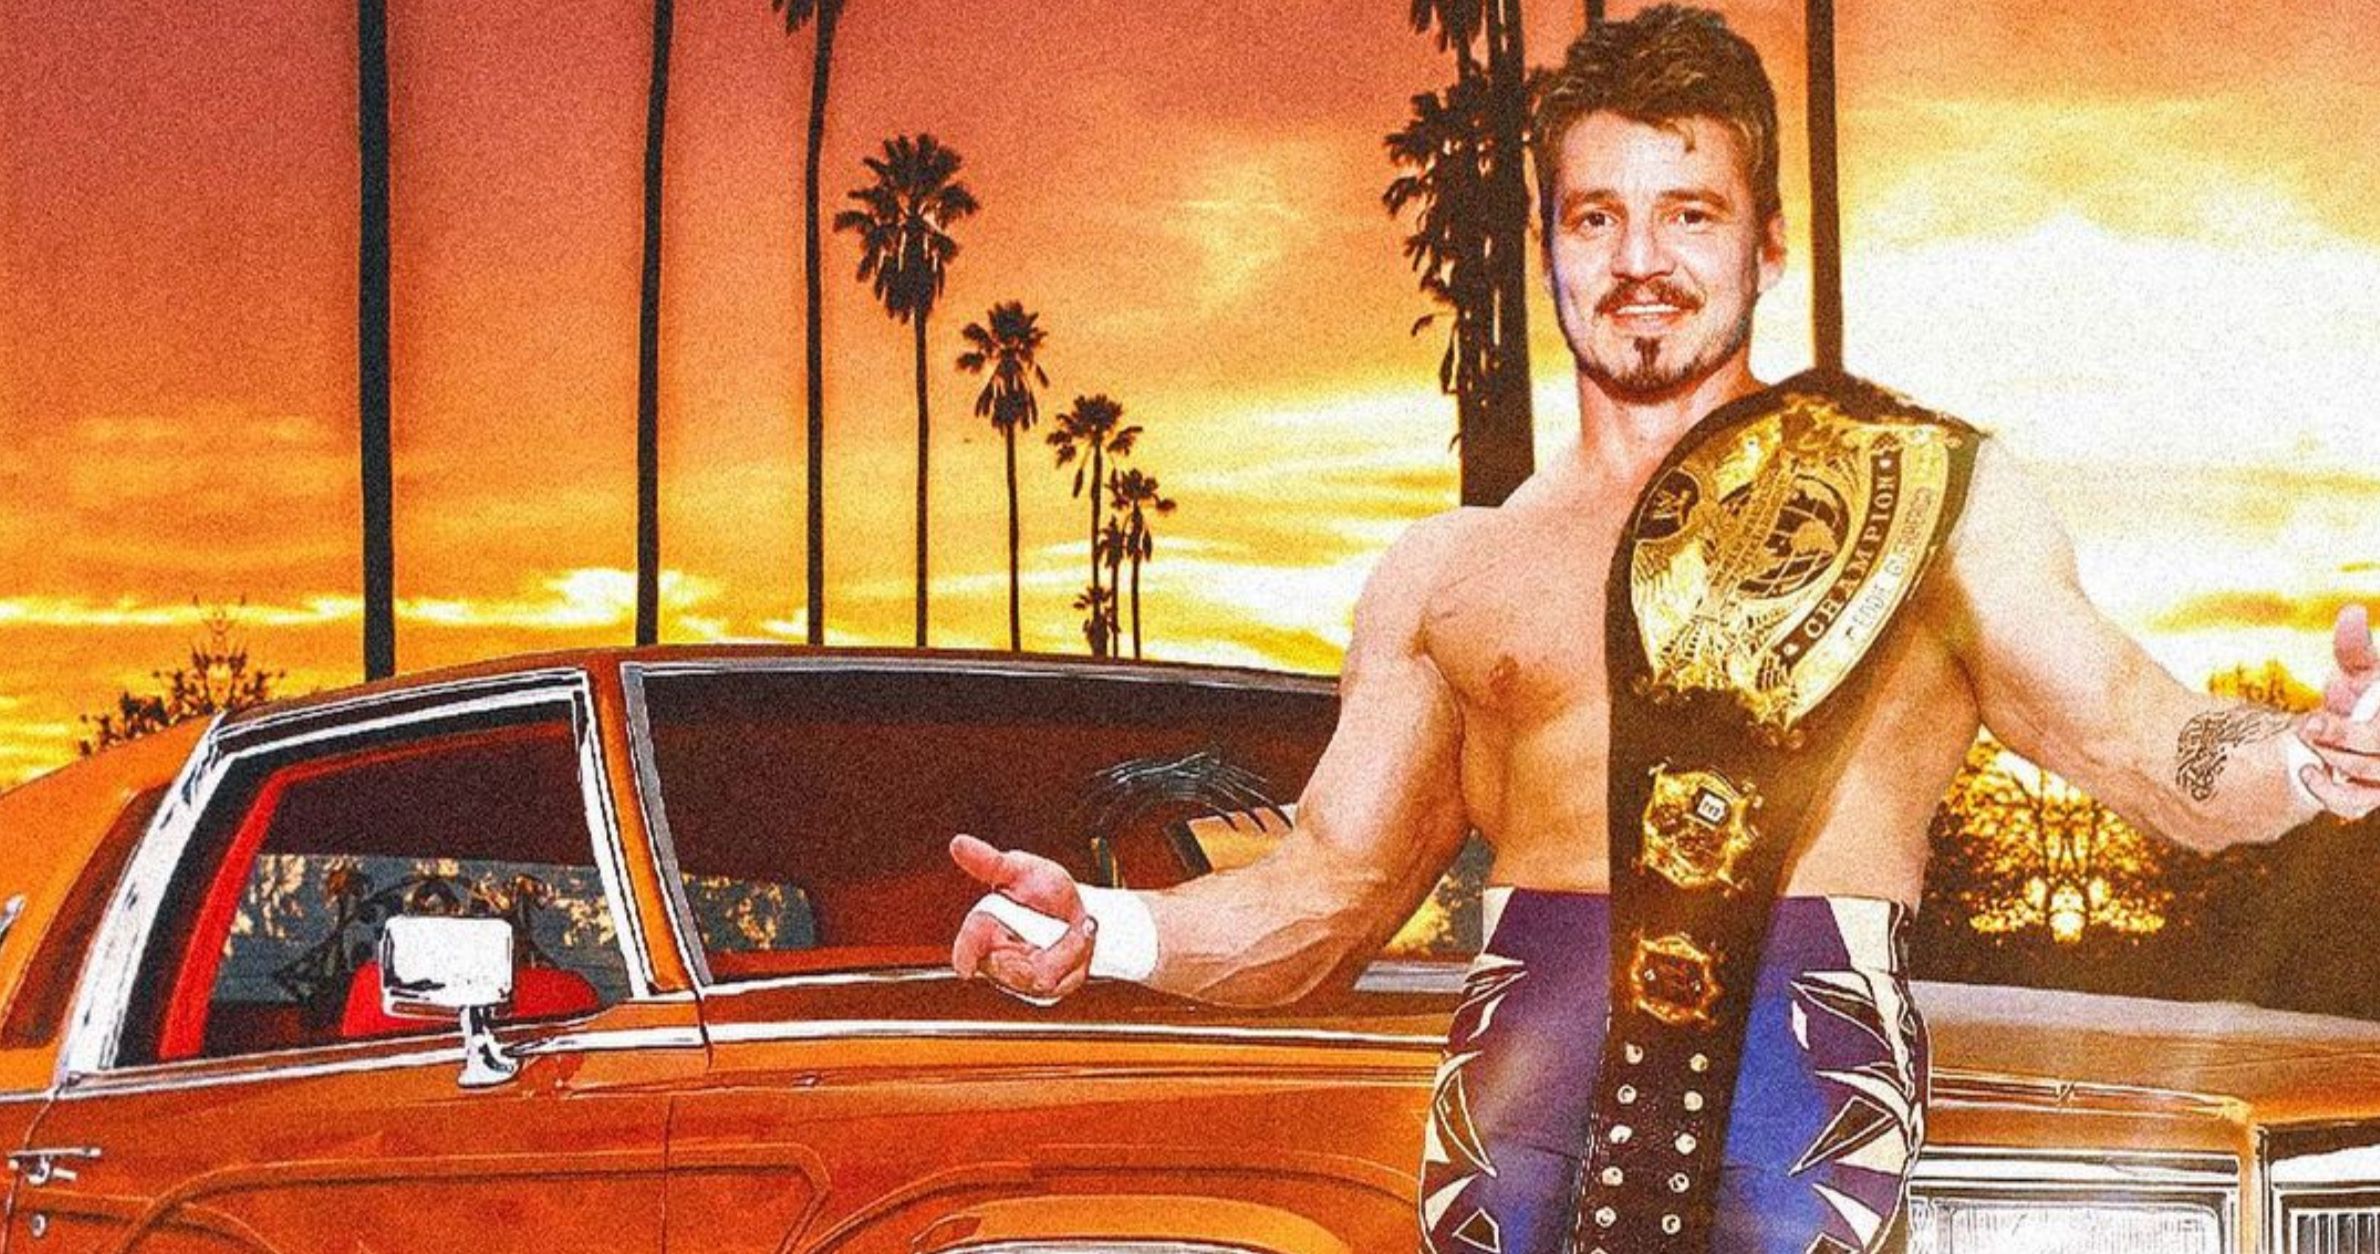 WWE Fans Want an Eddie Guerrero Biopic with Pedro Pascal as Latino Heat